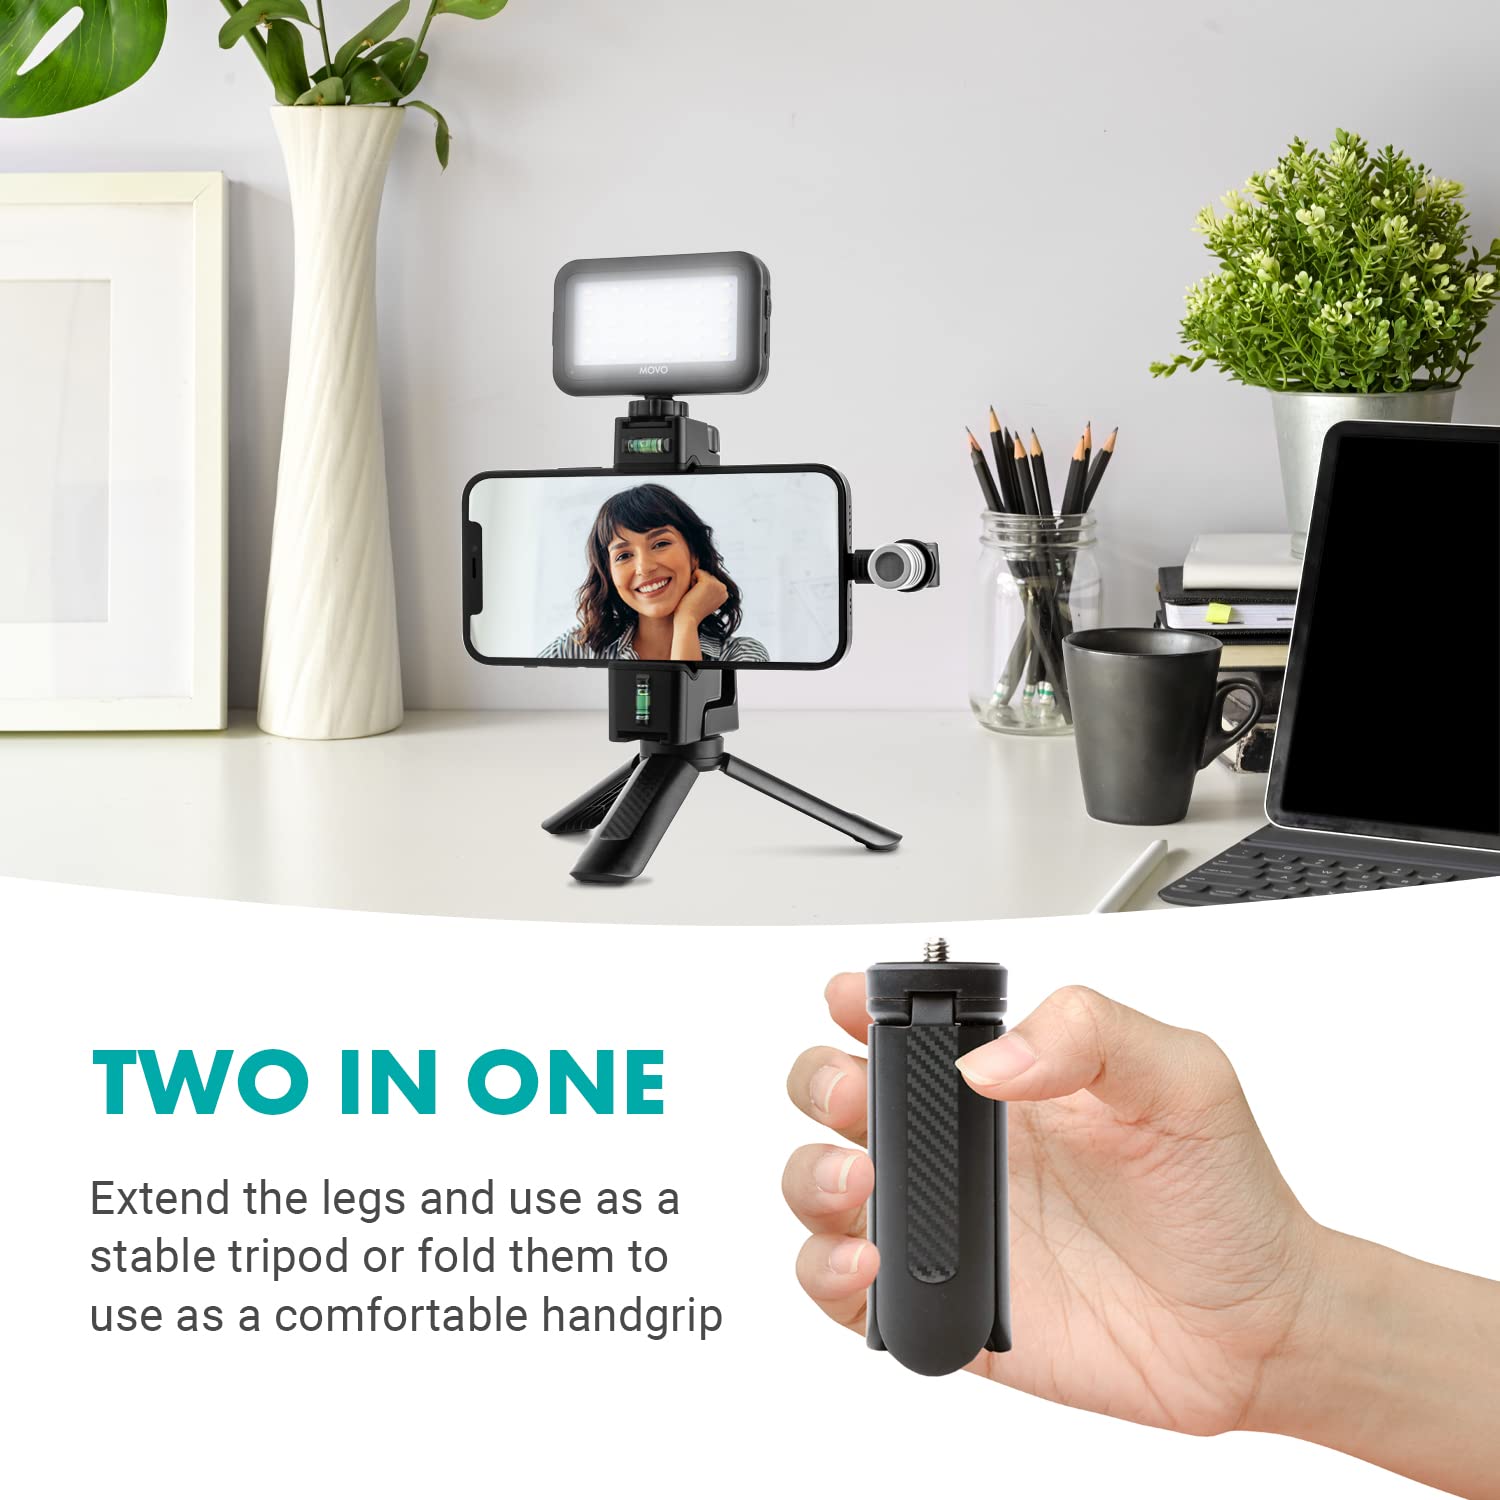 Movo uVlogSK Starter Kit for Content Creators - Smartphone Video Vlogging Kit for Android and USB-C Devices - Includes USB-C Microphone, LED Video Light, Phone Holder, Grip, and Mini Tripod  - Acceptable